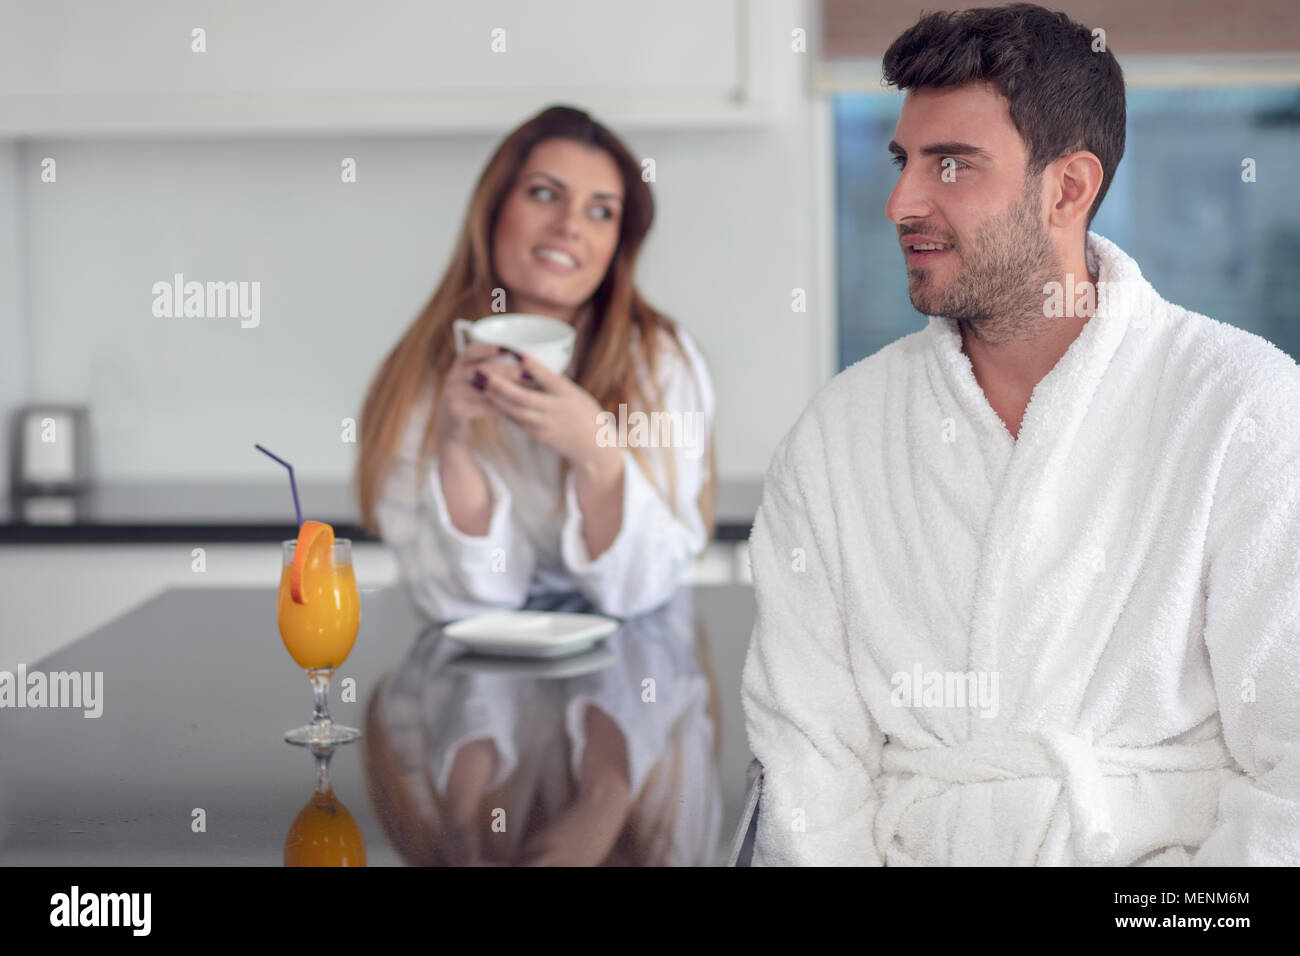 Portrait of a man and his wife in the kitchen while having breakf